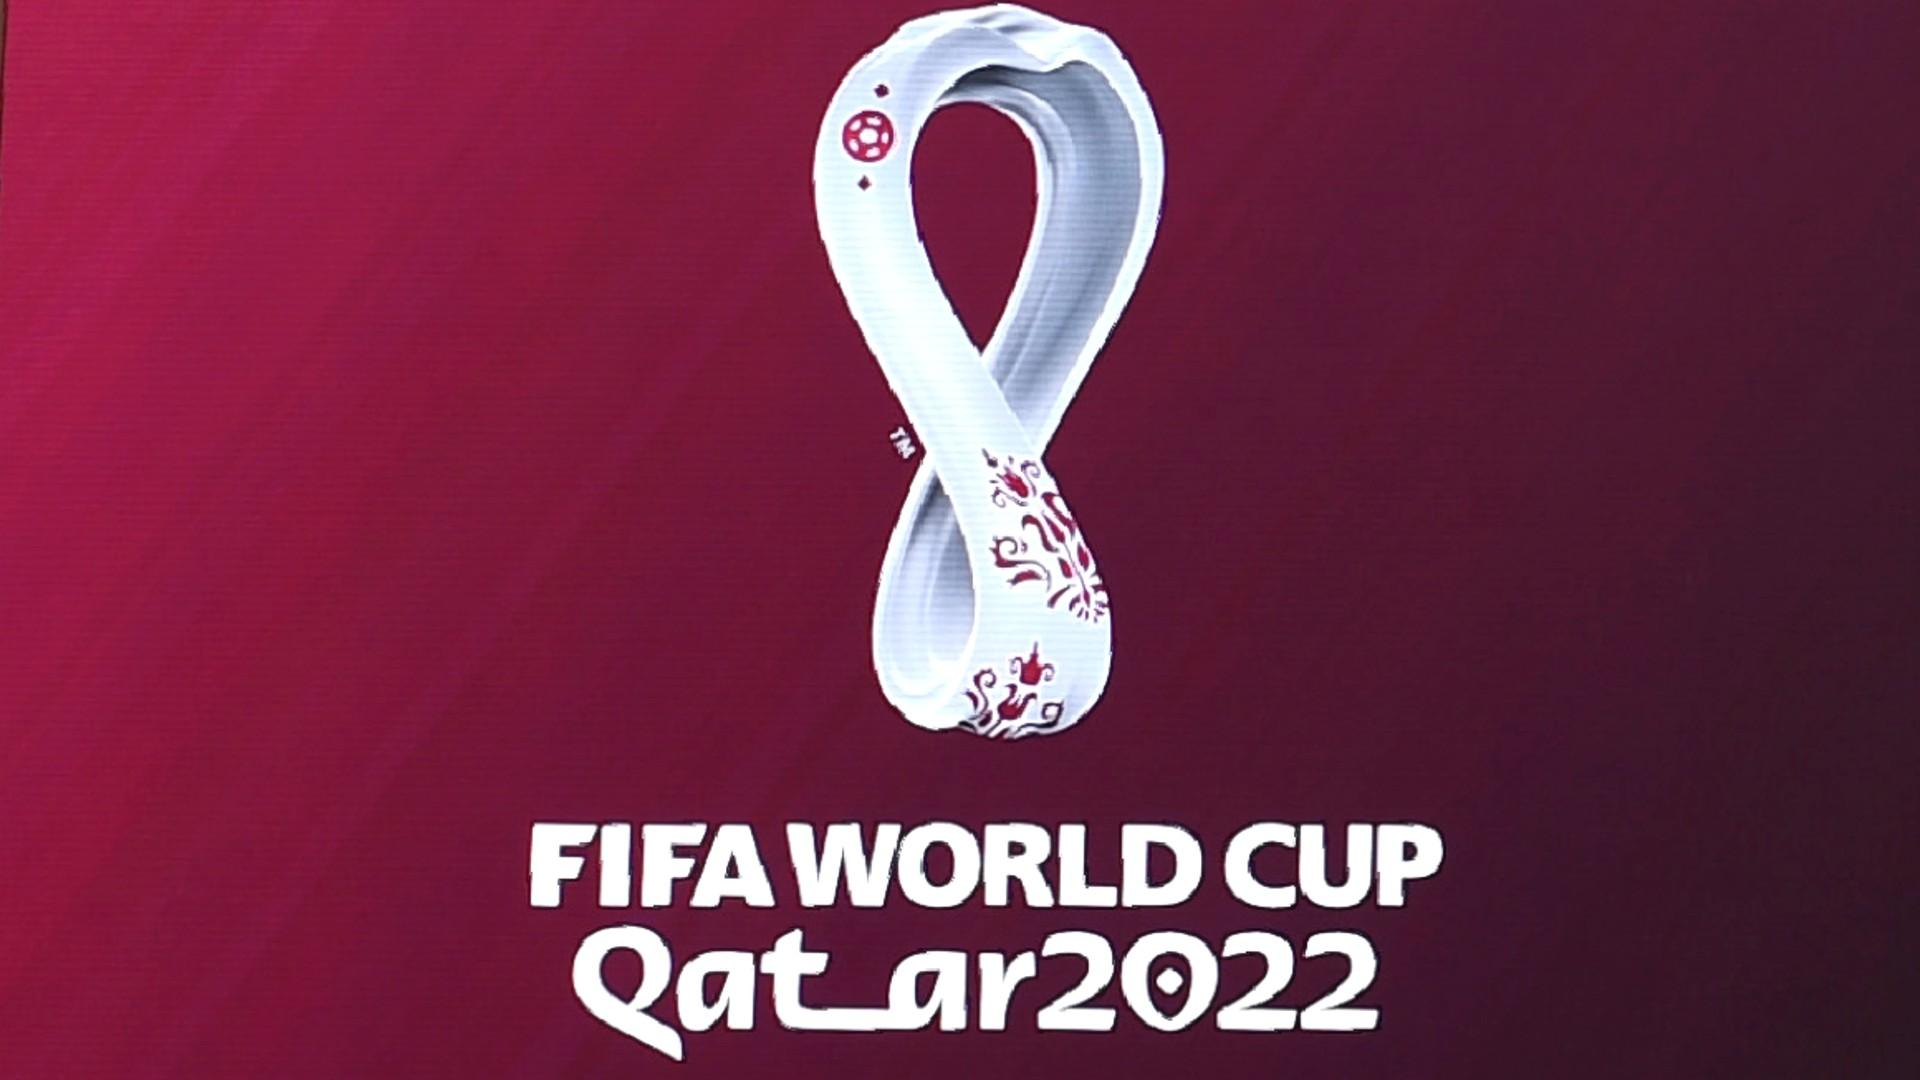 Nepali workers to be hired for Qatar World Cup